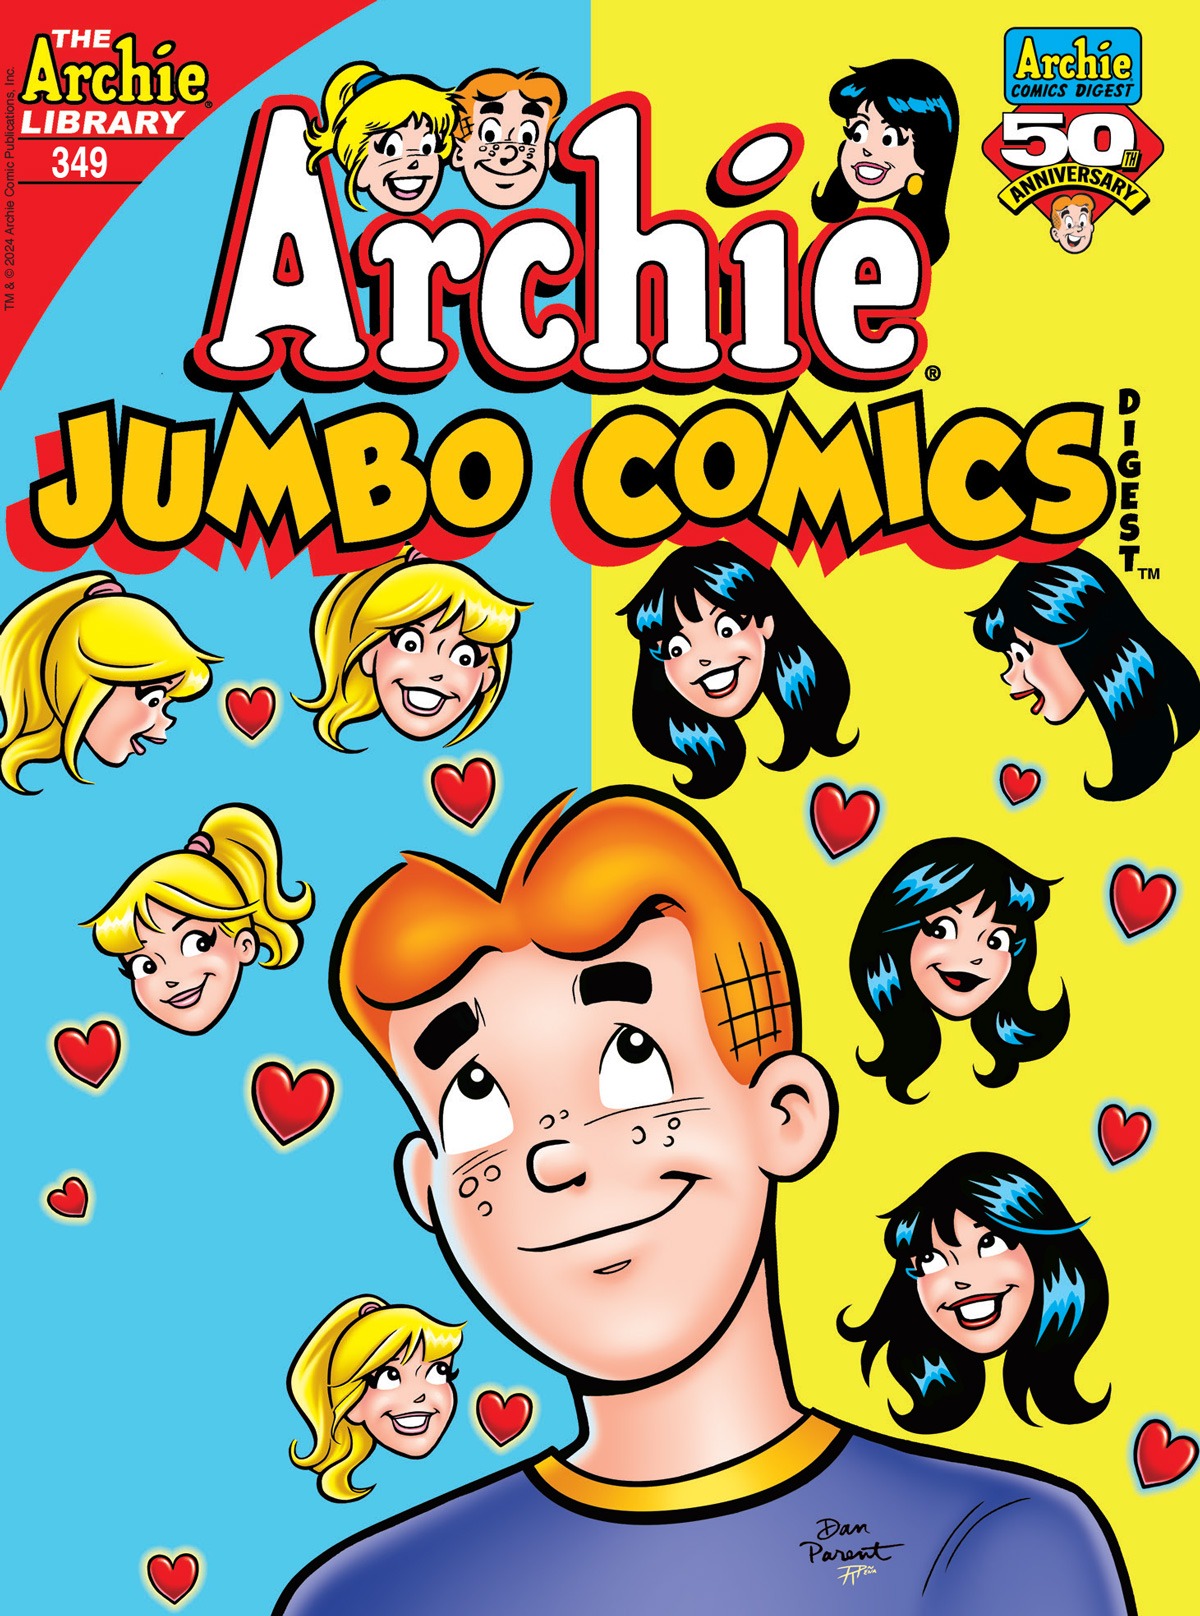 Cover of Archie Jumbo Comics Digest #349, showing Archie in the foreground, with images of Betty's face on a blue background on his left and Veronica's face on a yellow background on the right, both interspersed with hearts.